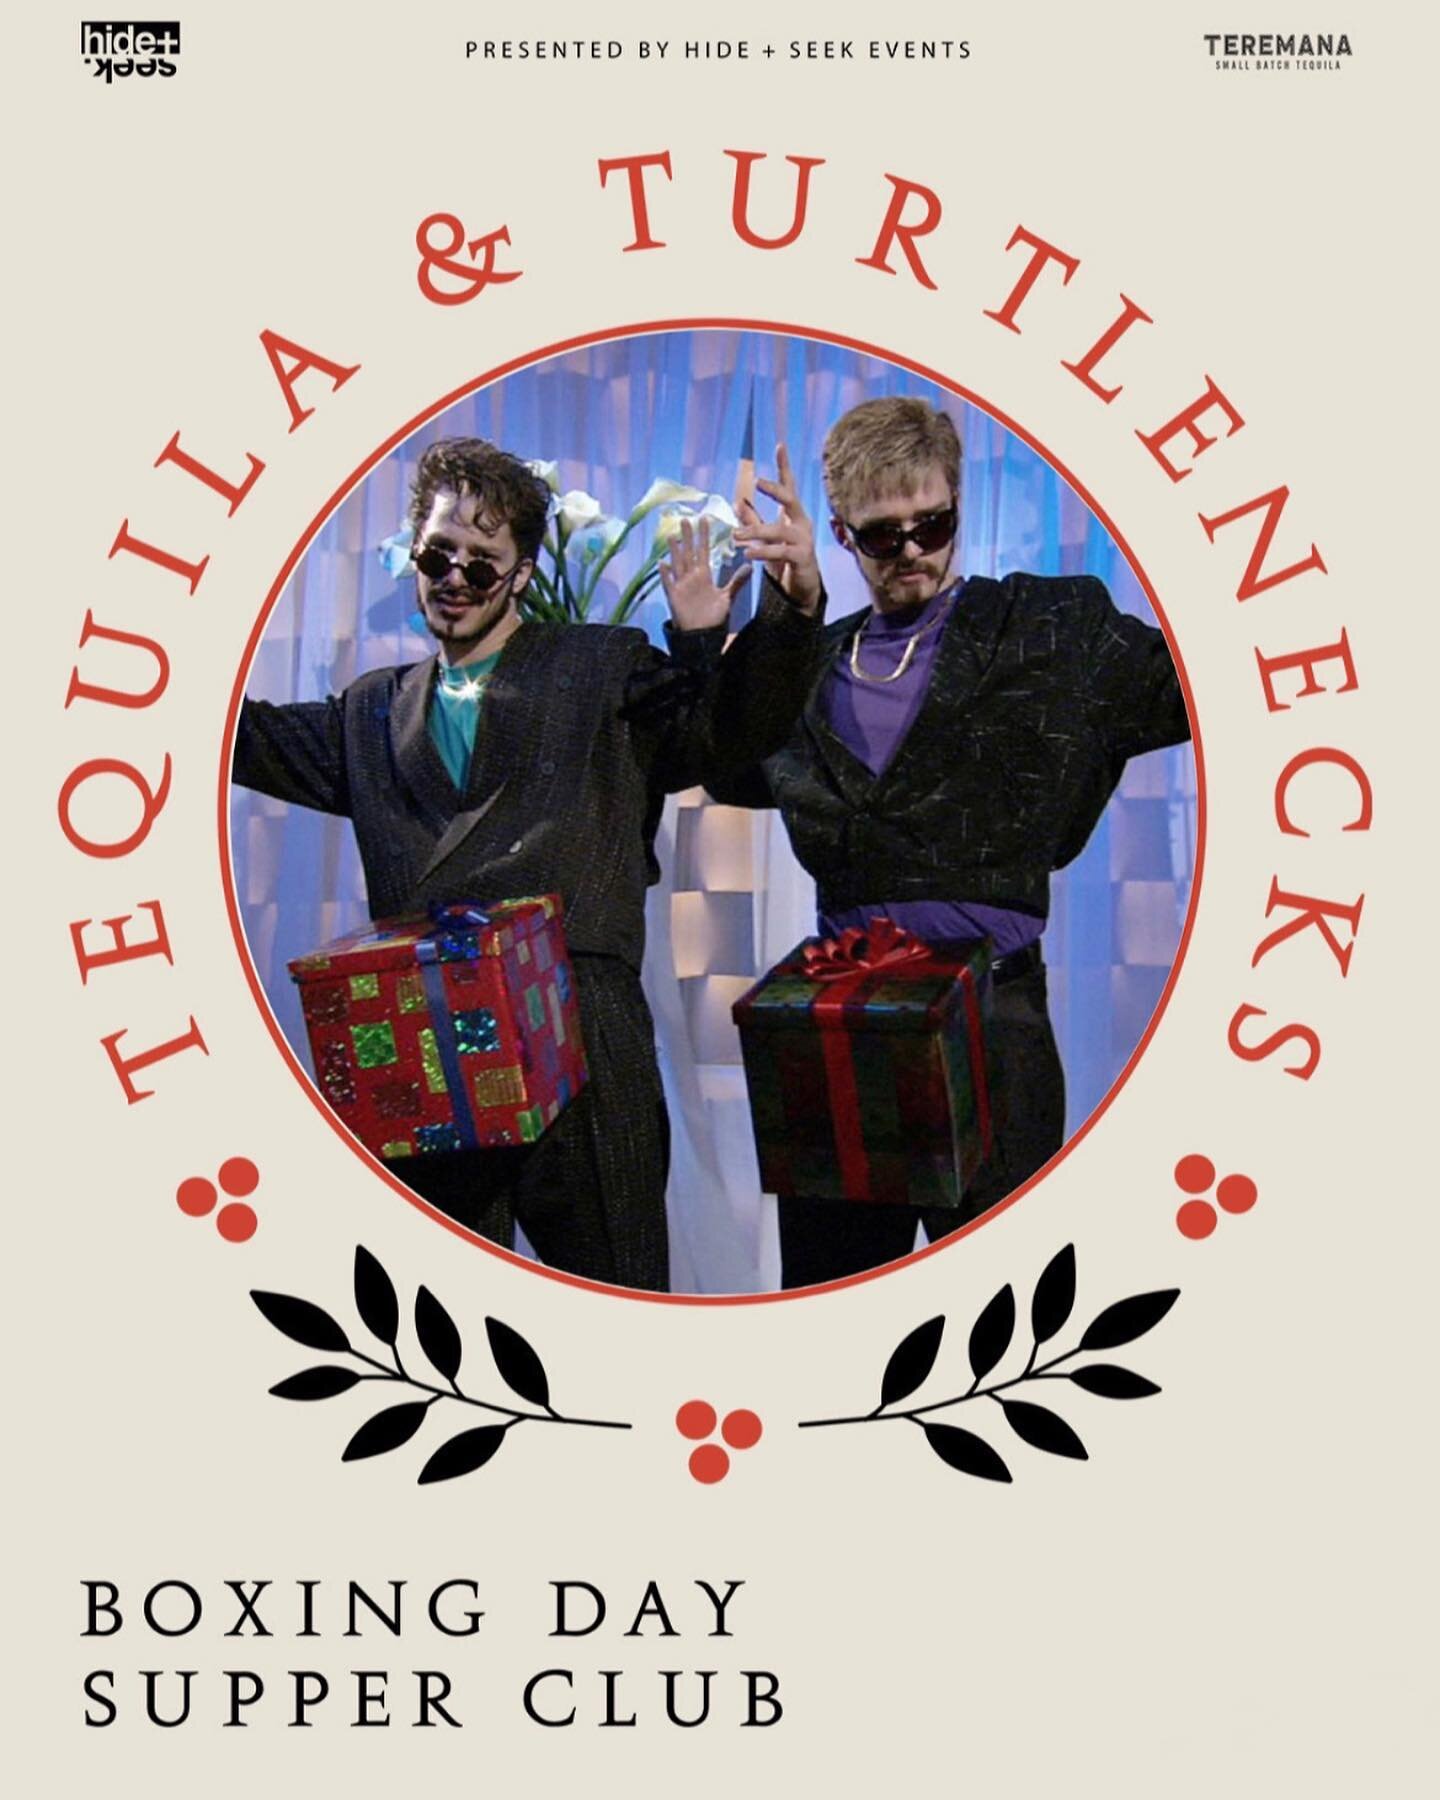 TICKETS ARE ALMOST GONE FOR THE BIGGEST BOXING DAY PARTY AROUND - TEQUILA AND TURTLENECKS - $200 Bottles $5 shots of Teremna all night long! DJs @rashadrawkus @erikmanese @jfresh604 - link in bio - see you Monday!